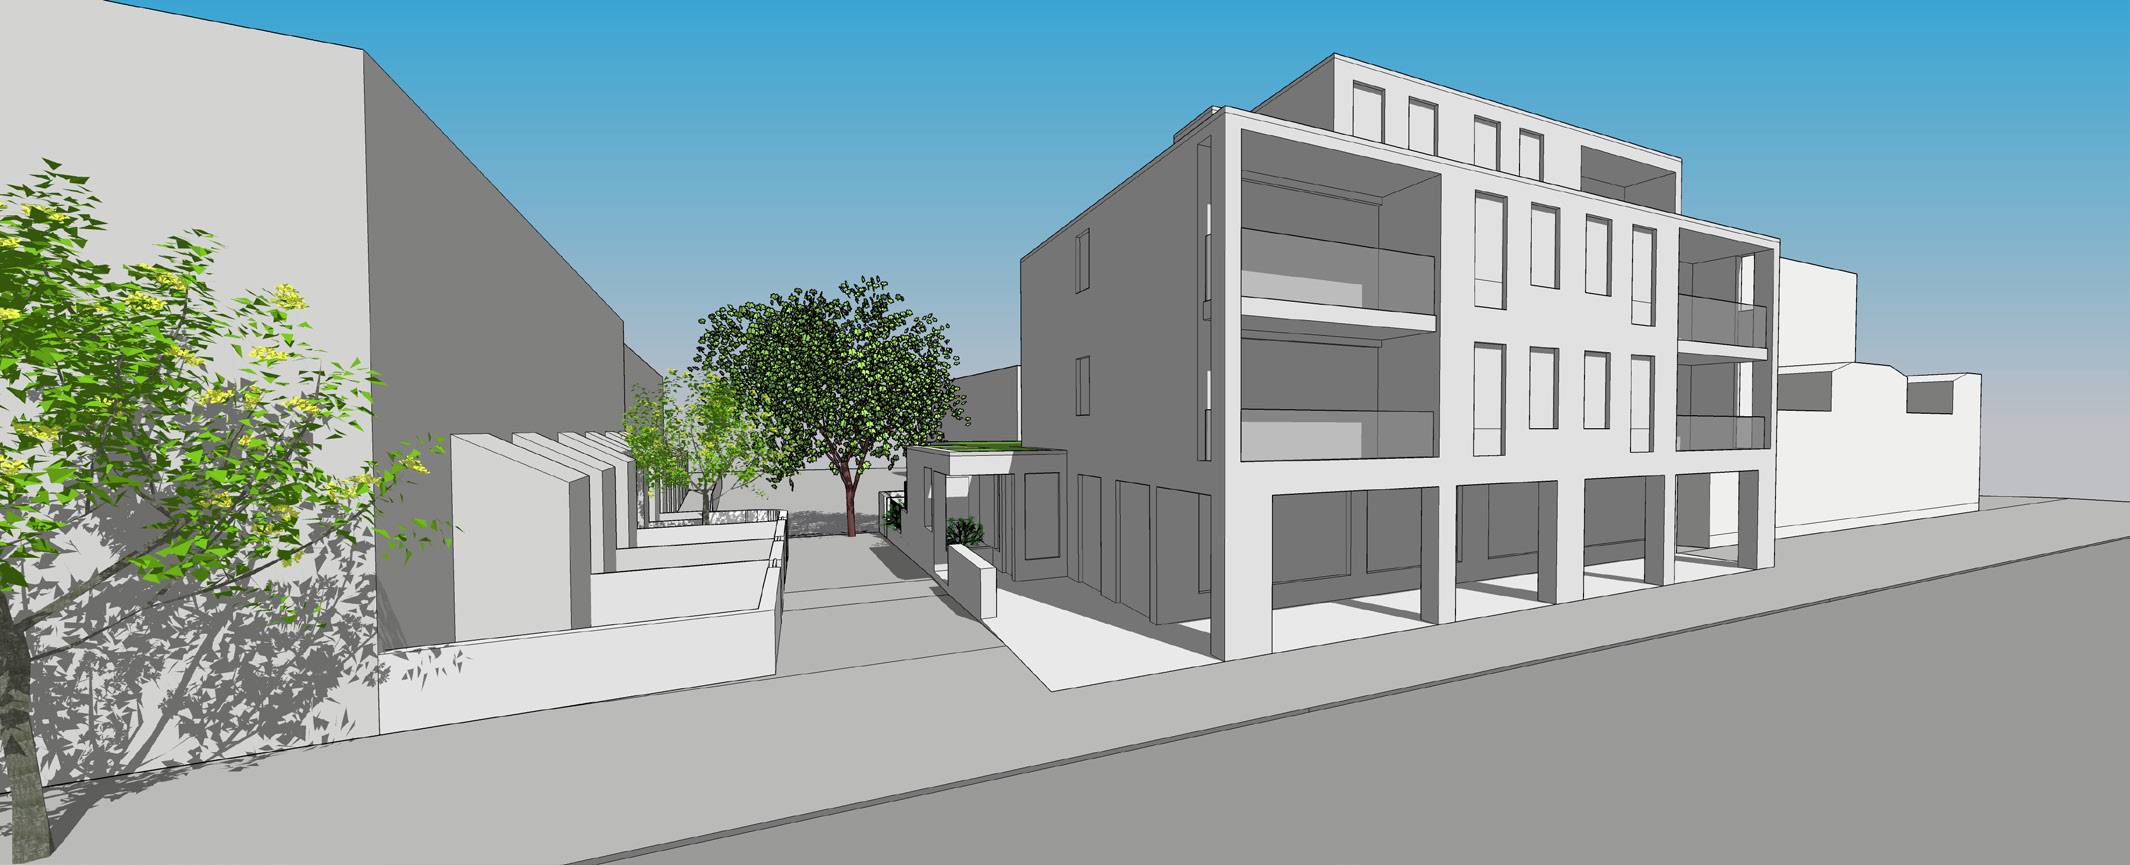 Image from ALU188 Streetscape Assessment Rev A, page 11.png